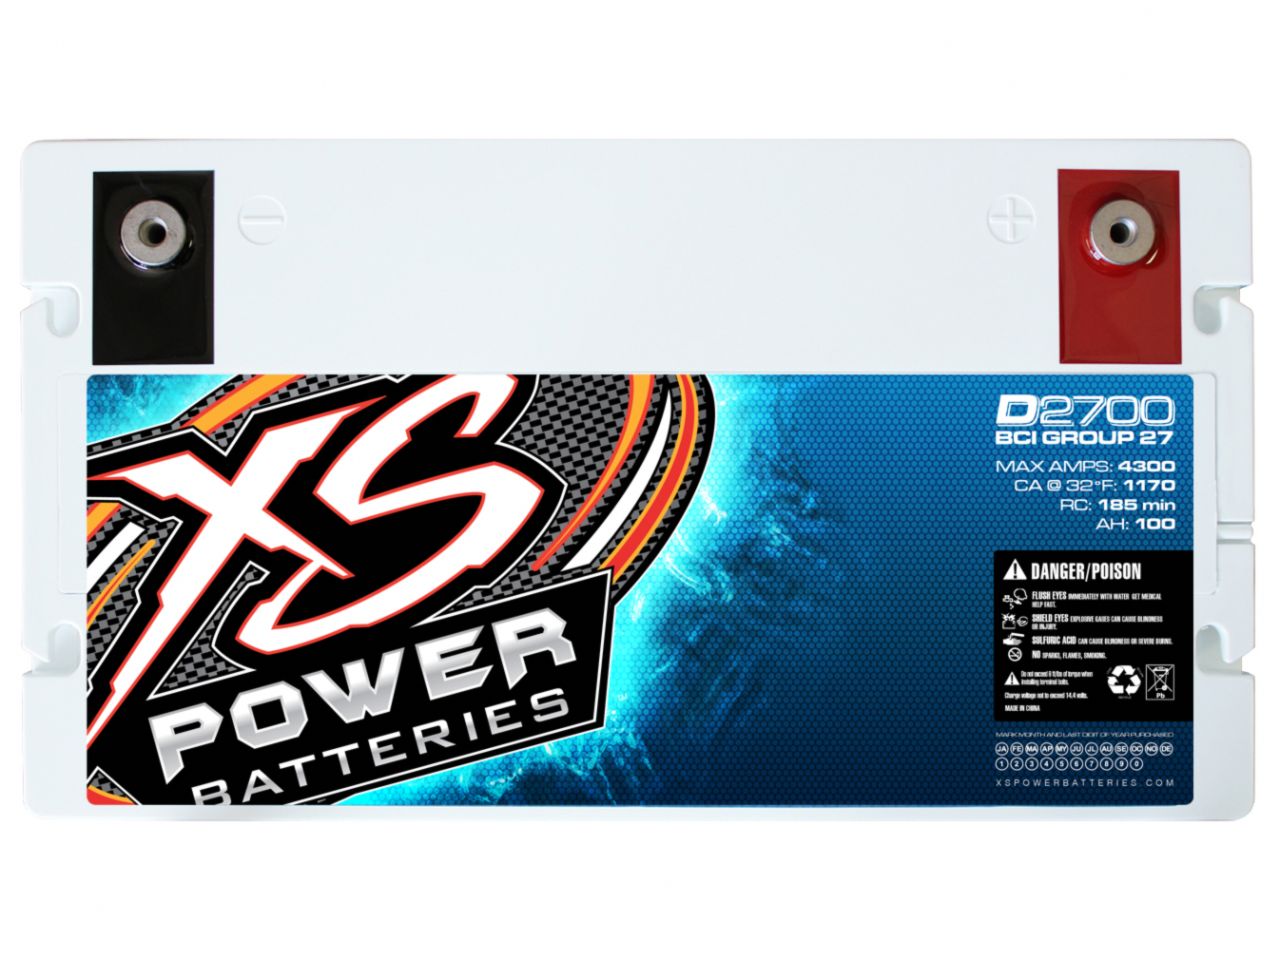 XS Power 12V BCI Group 27 AGM Battery, Max Amps 4,300A, CA: 1170, Ah: 100